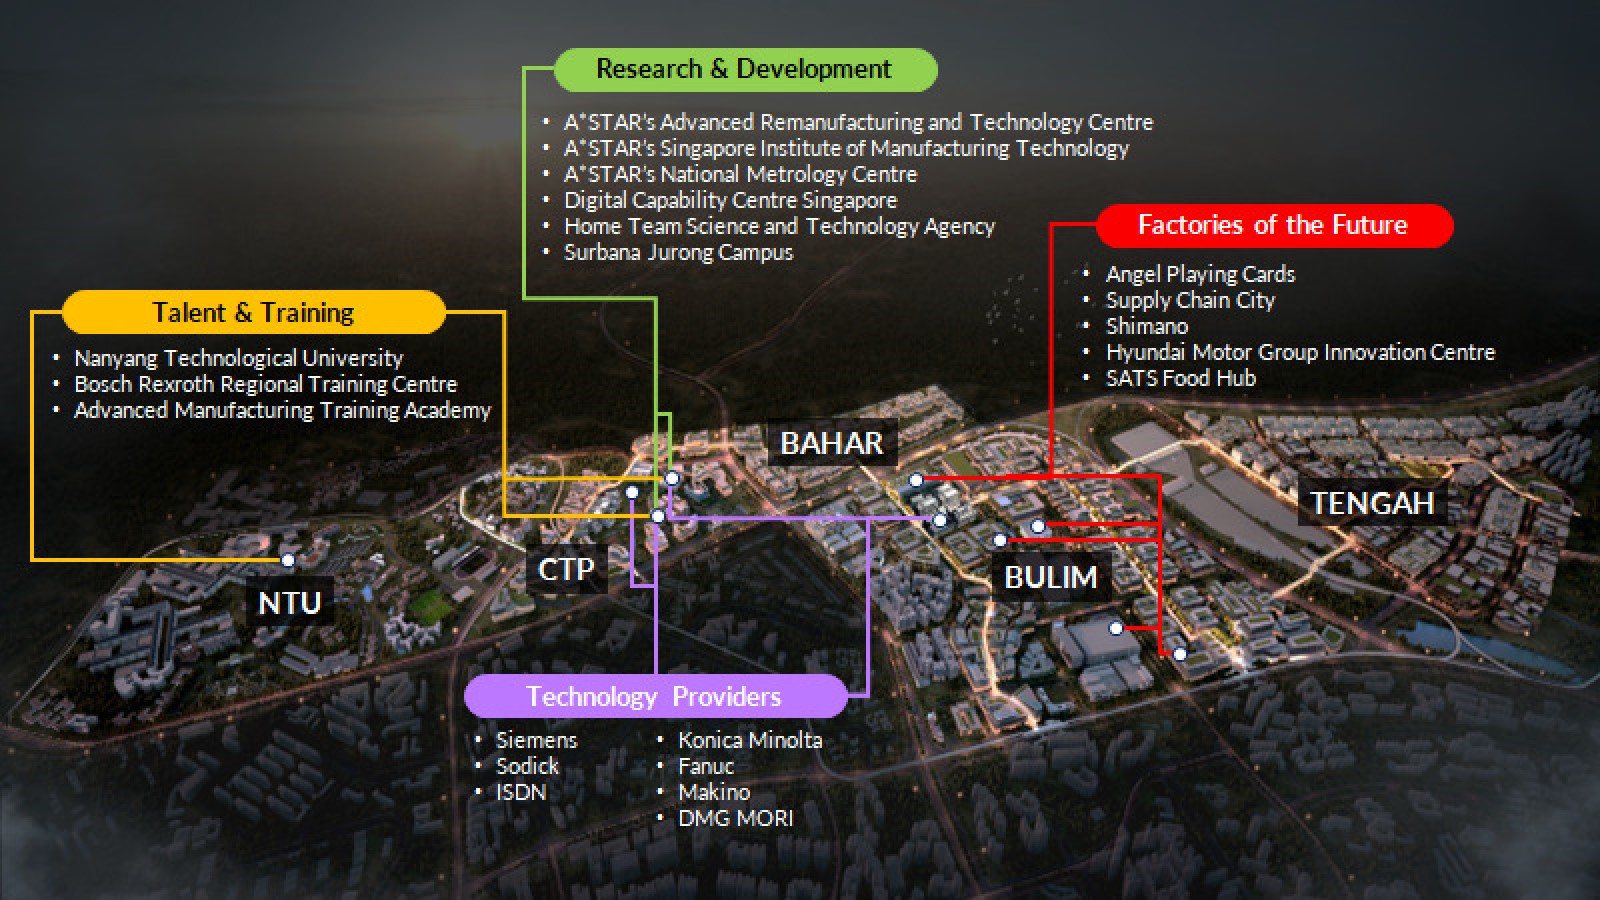 Visual map of JTC Jurong Innovation District precincts and companies